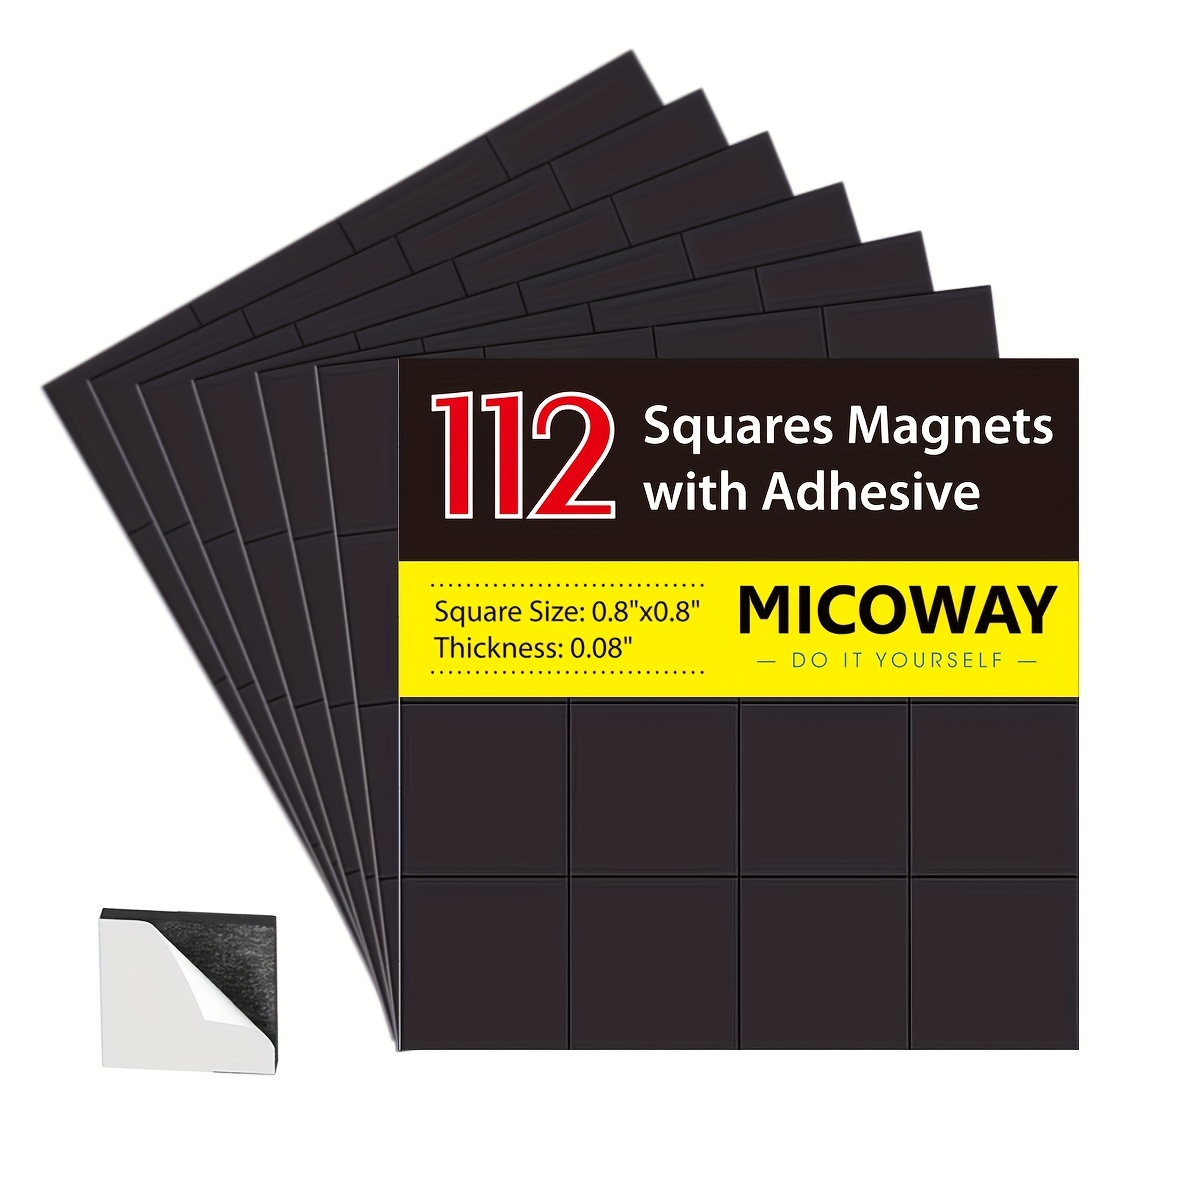  NEOCLICK Magnetic Squares - Magnets with Adhesive